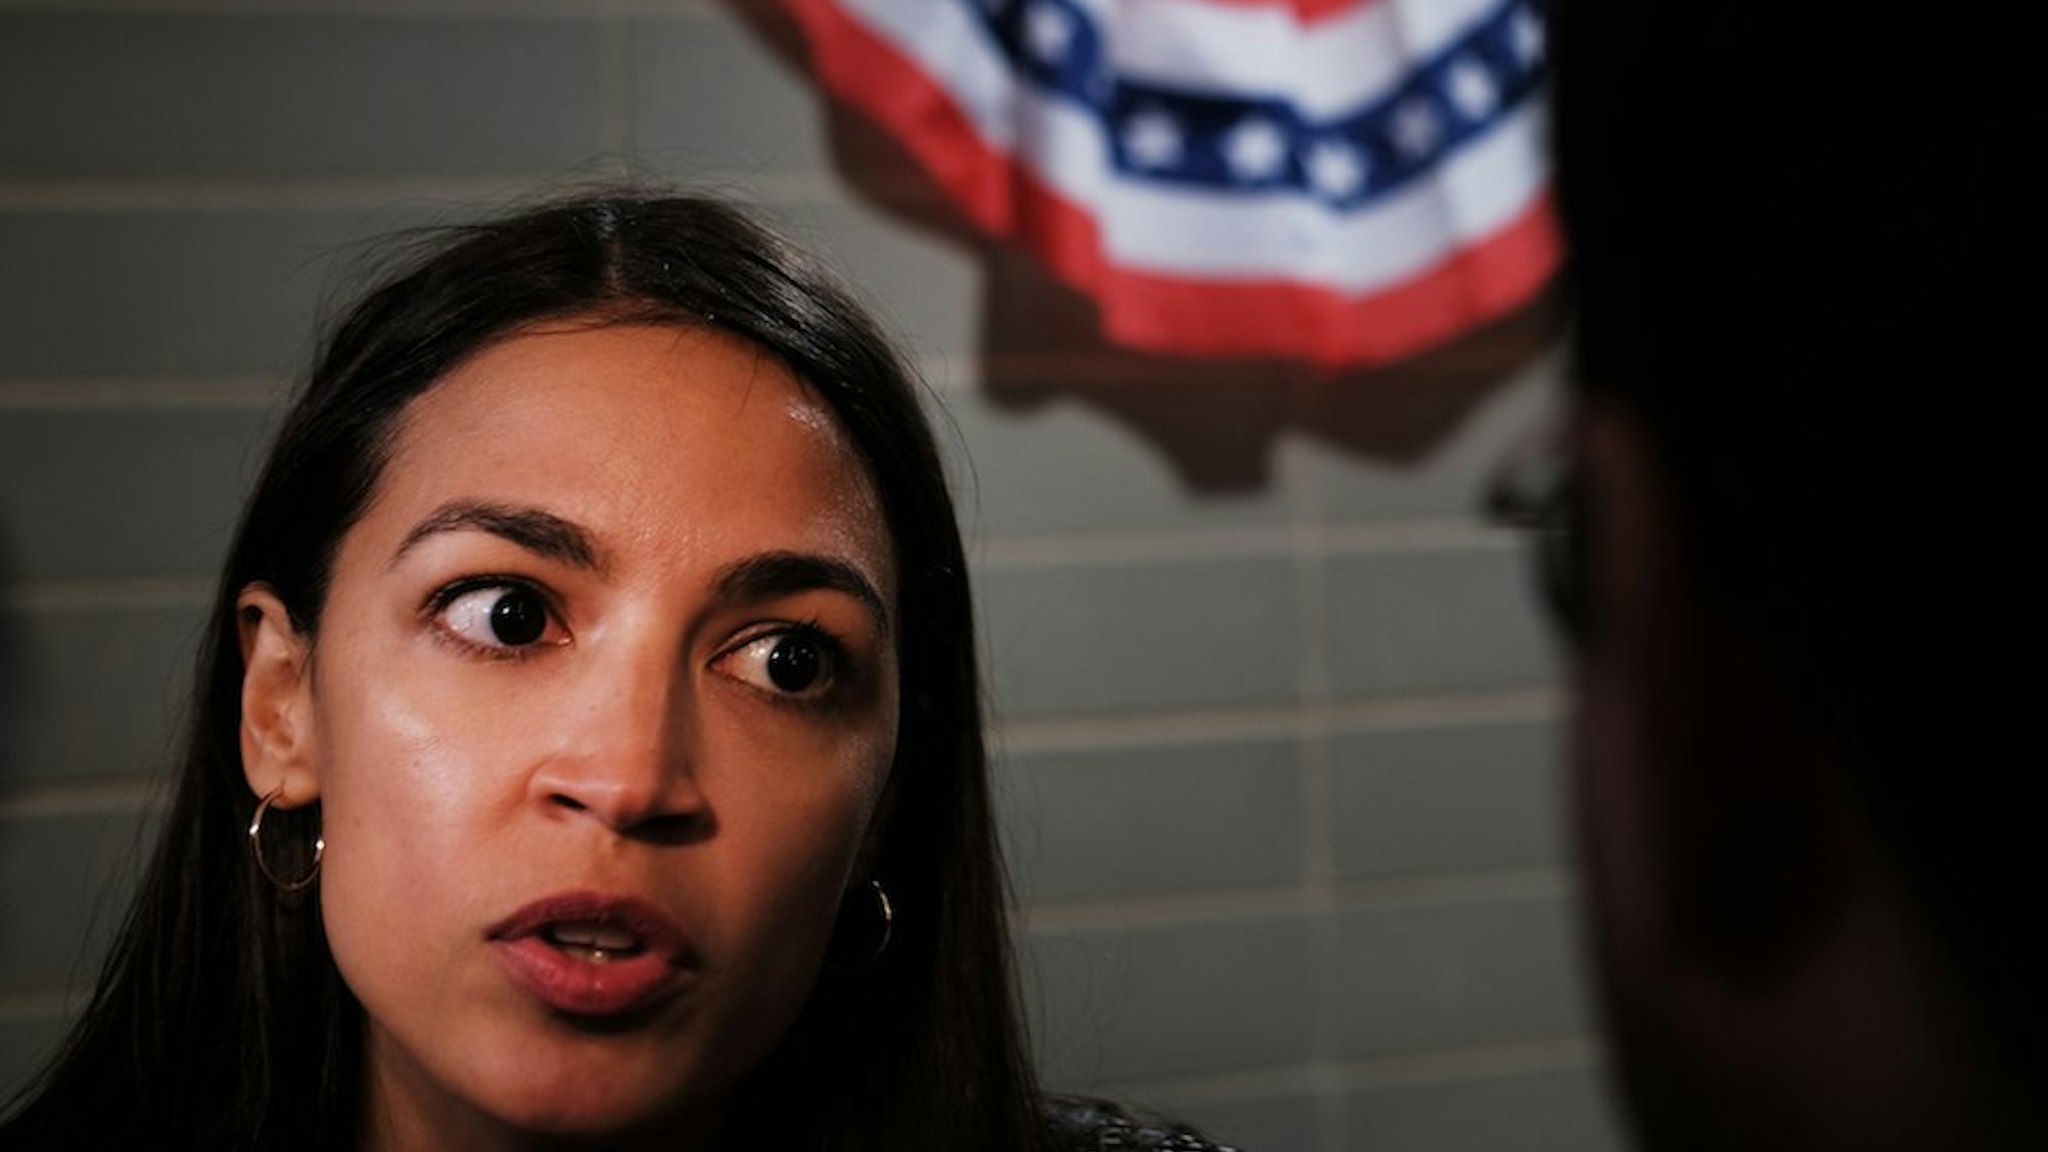 U.S. Rep. Alexandria Ocasio-Cortez (D-NY) speaks to the media after a public housing town hall at a New York City Housing Authority (NYCHA) residence on August 29, 2019 in the Bronx borough of New York City.